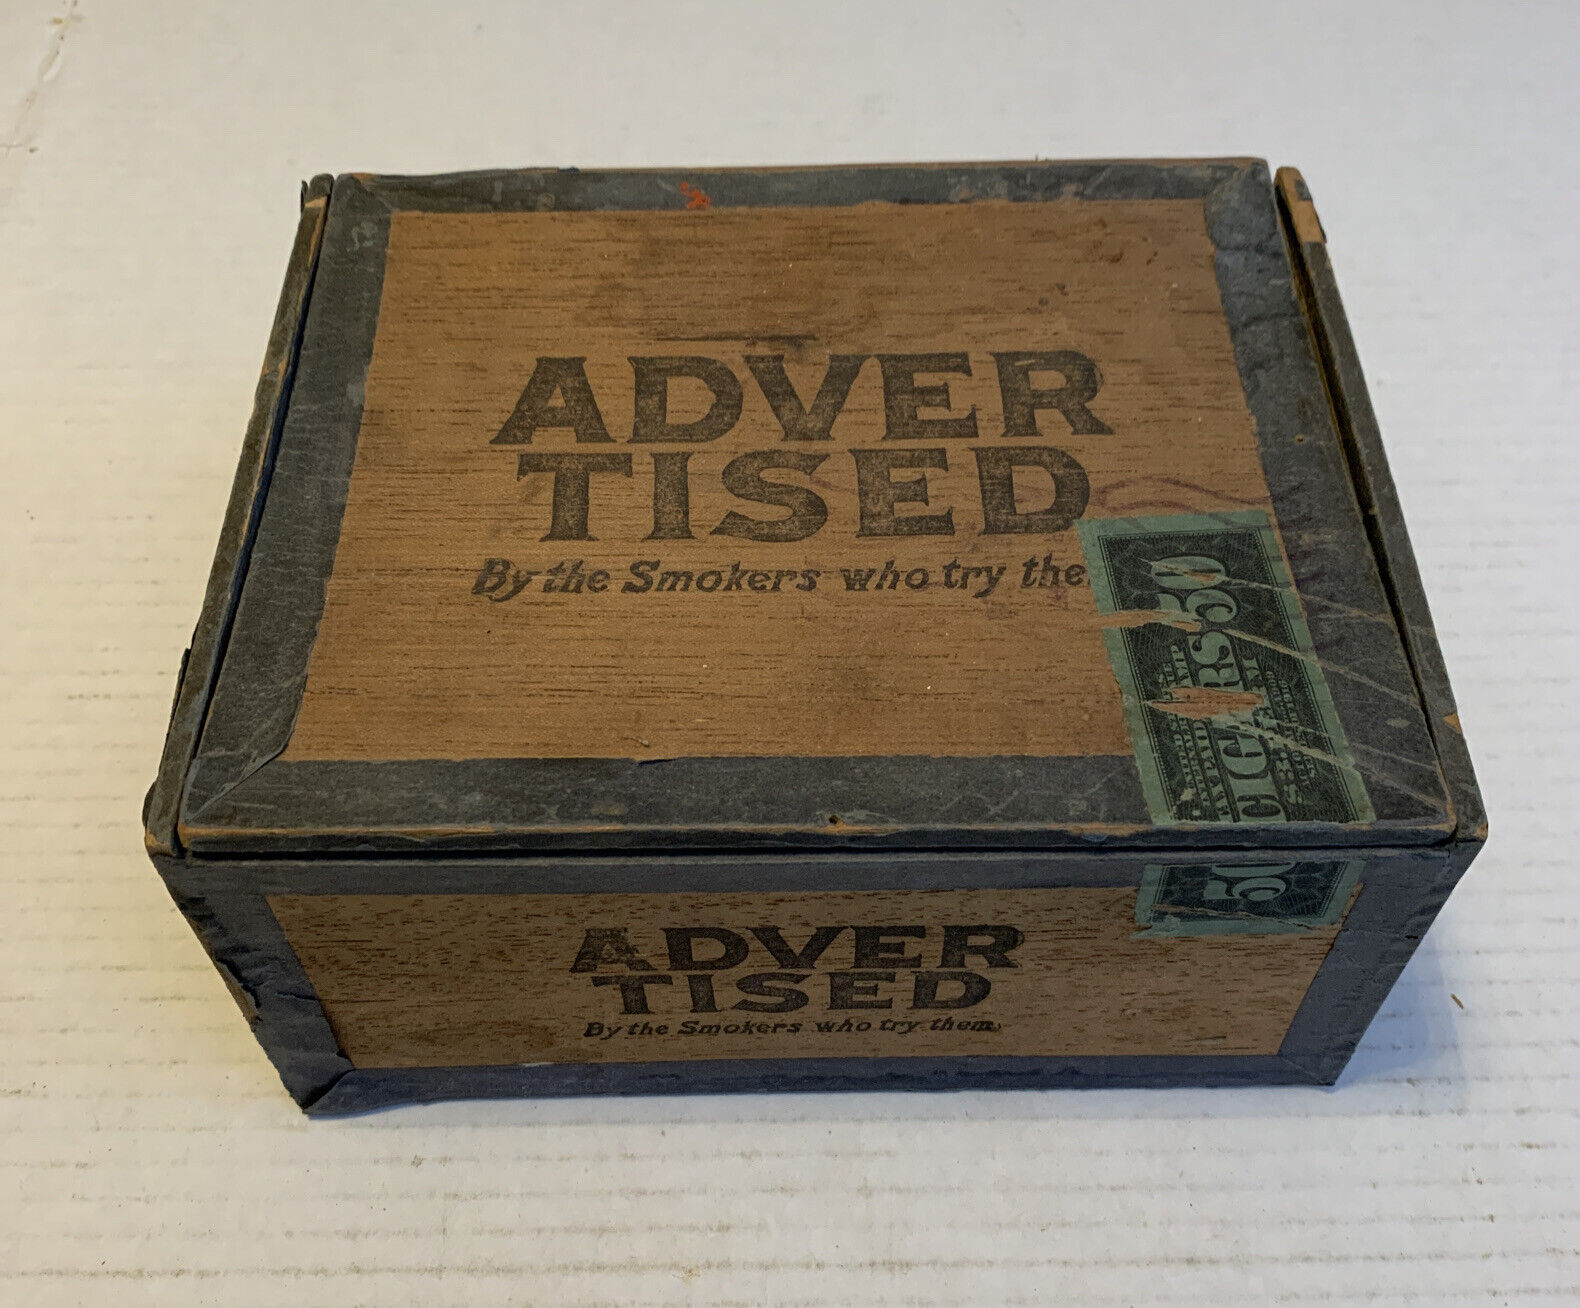 Adver Tised Cigar Box Series Of 1916 Tax Stamp Antique W.S. Leyda Maker